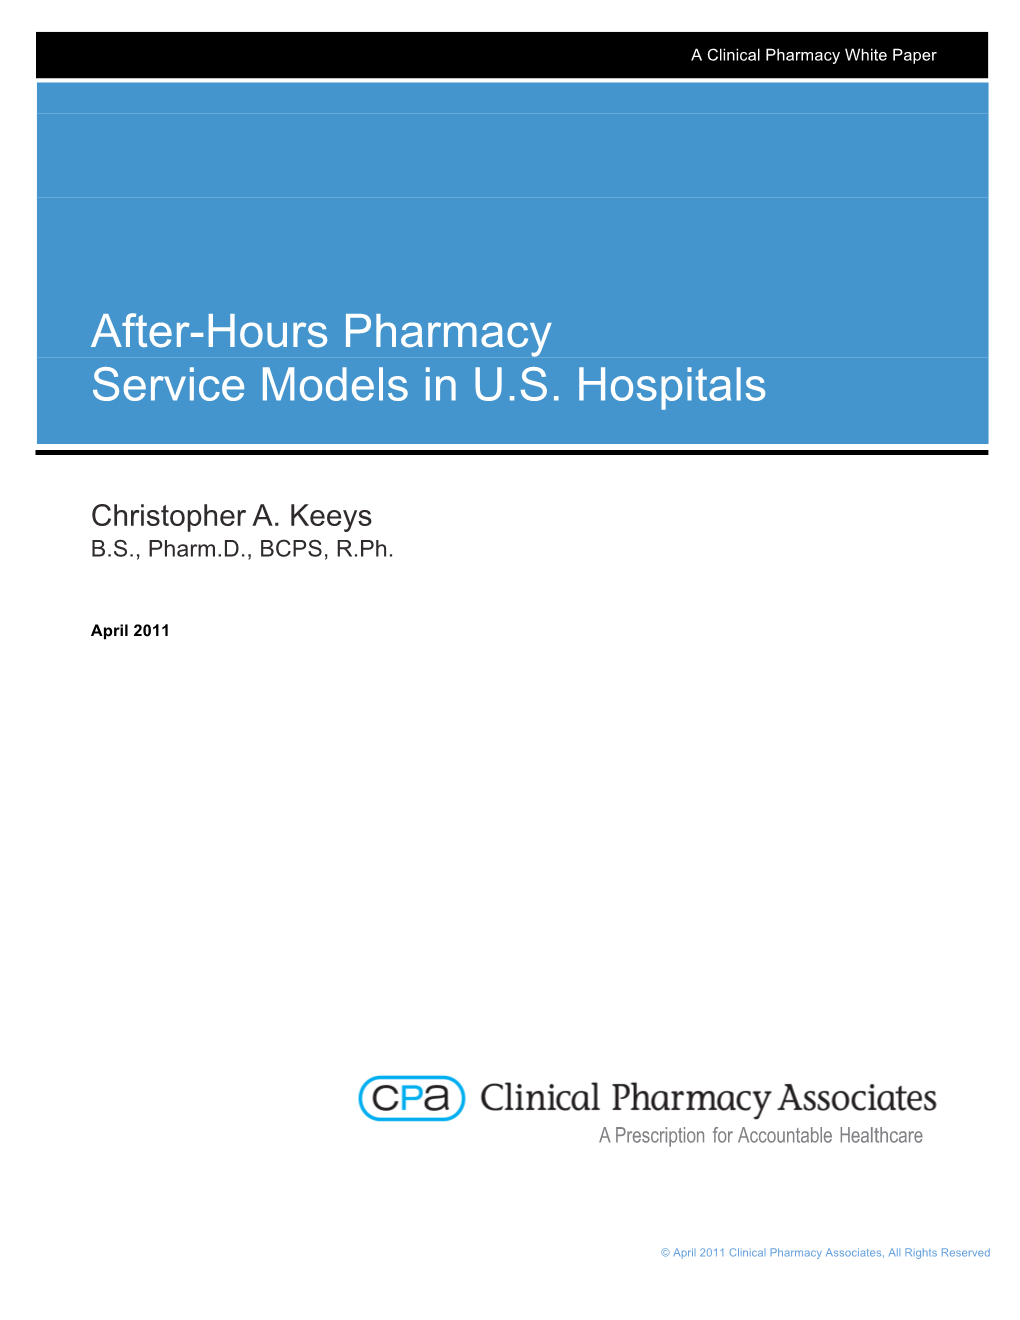 After-Hours Pharmacy Service Models in U.S. Hospitals